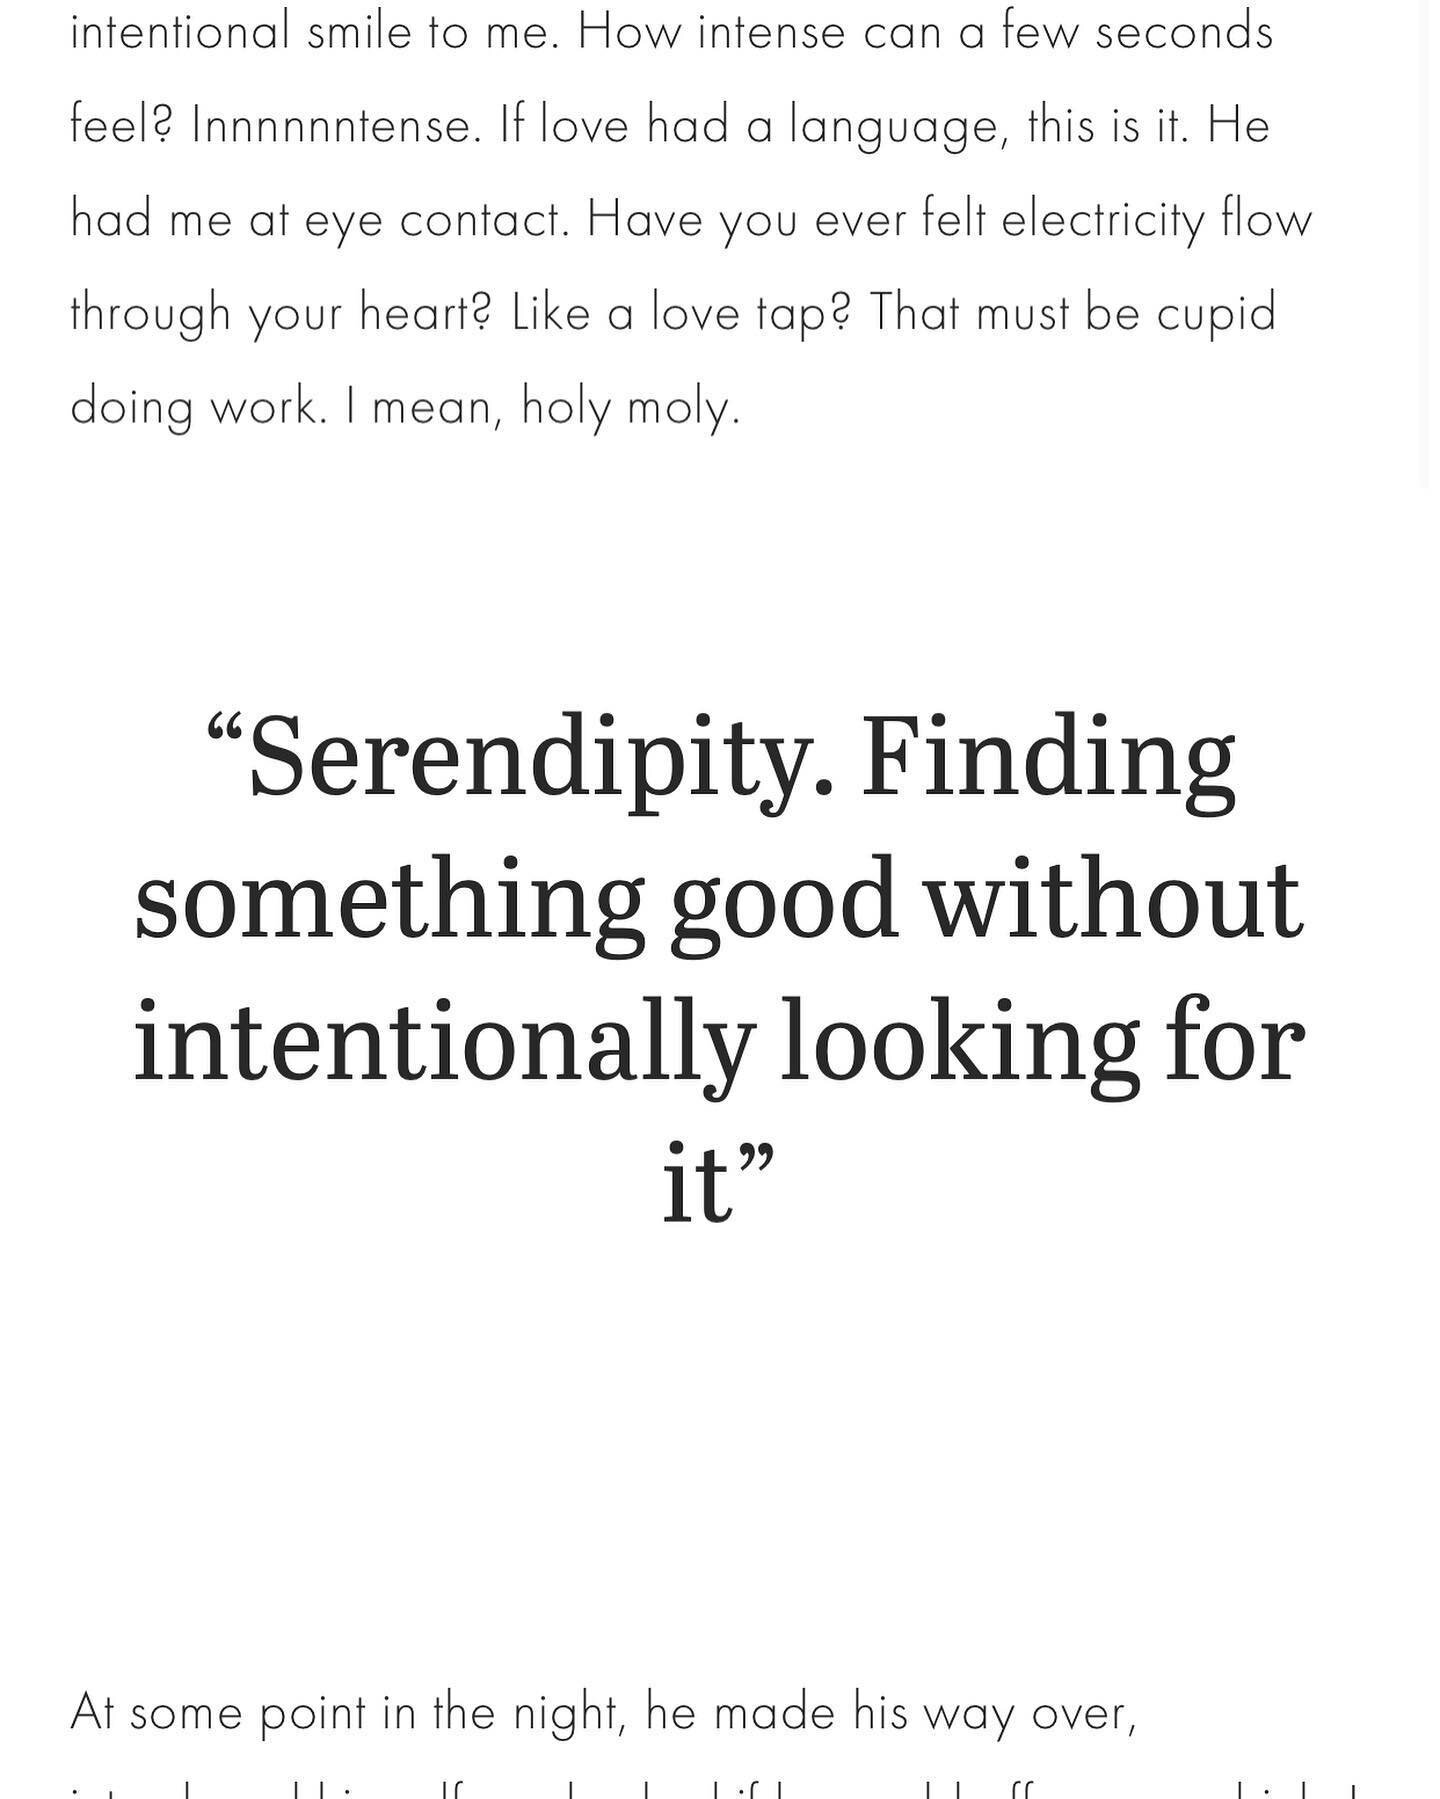 Serendipity saved me &mdash; find out how and why on my new blog post 🤍 #relationships #dating #denverblogger #blogger